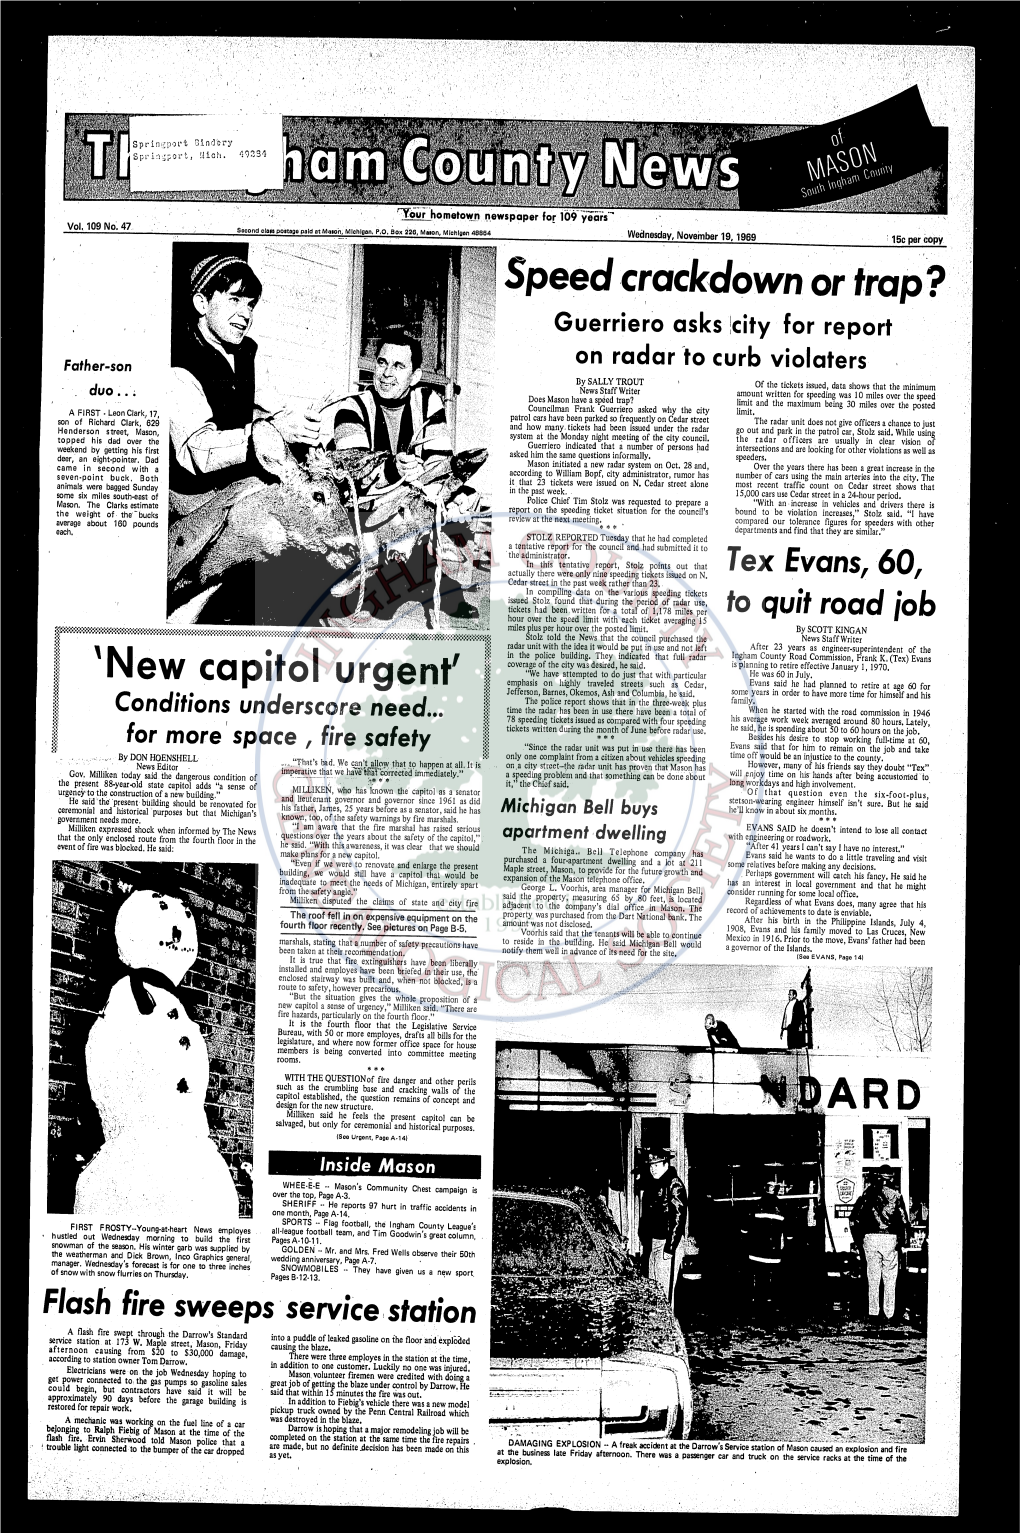 The Ingham County'news; W~Dnesday, November 19, 1969 Page A-3 · ·Exc:E~C! Goal by $700 I Community Chest Goes Overtop